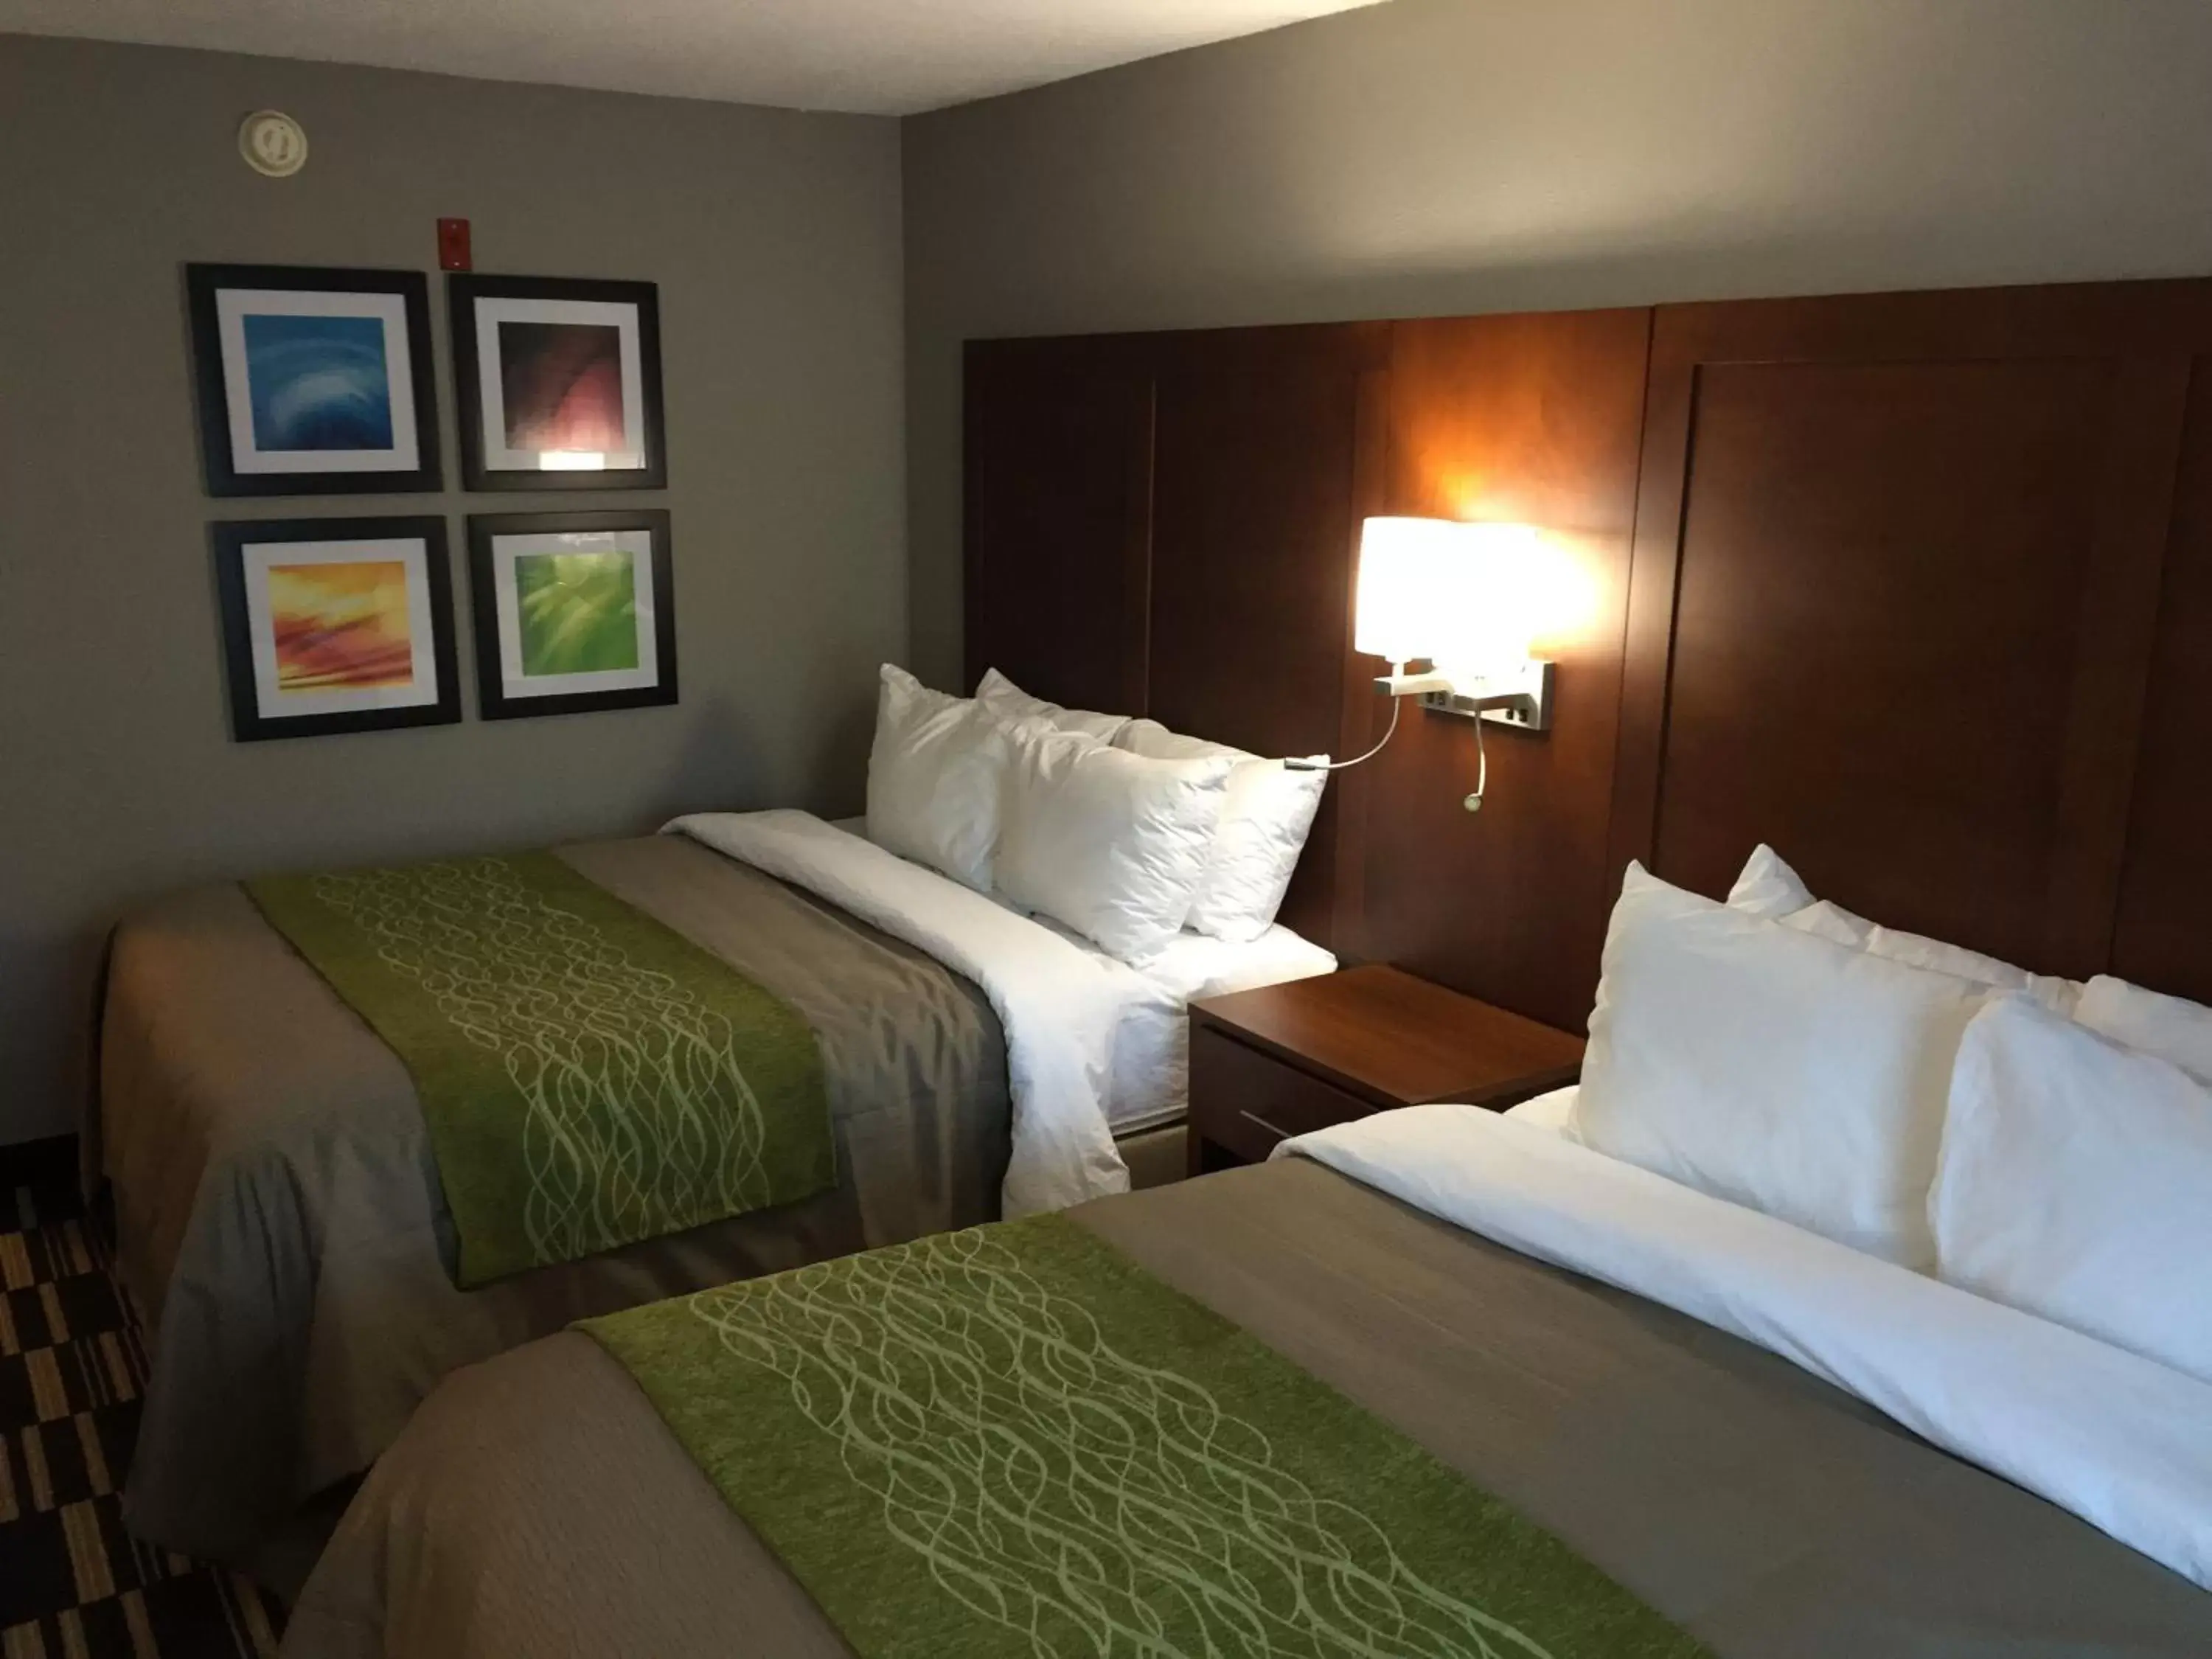 Queen Room with Two Queen Beds - Non-Smoking in Quality Inn & Suites Ashland near Kings Dominion